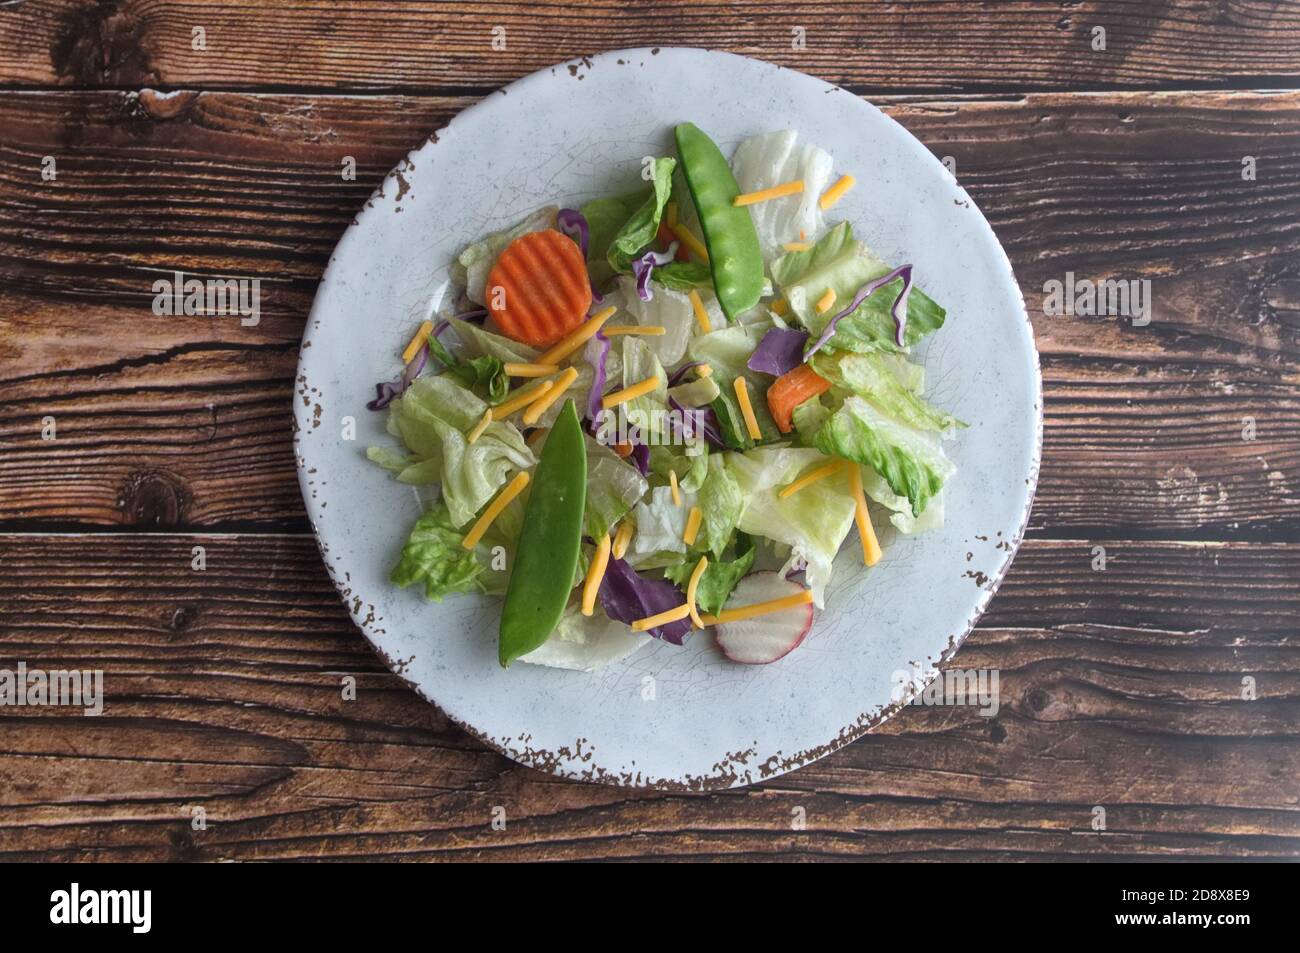 Mixed vegetable salad on a white plate centered on a wooden background Stock Photo